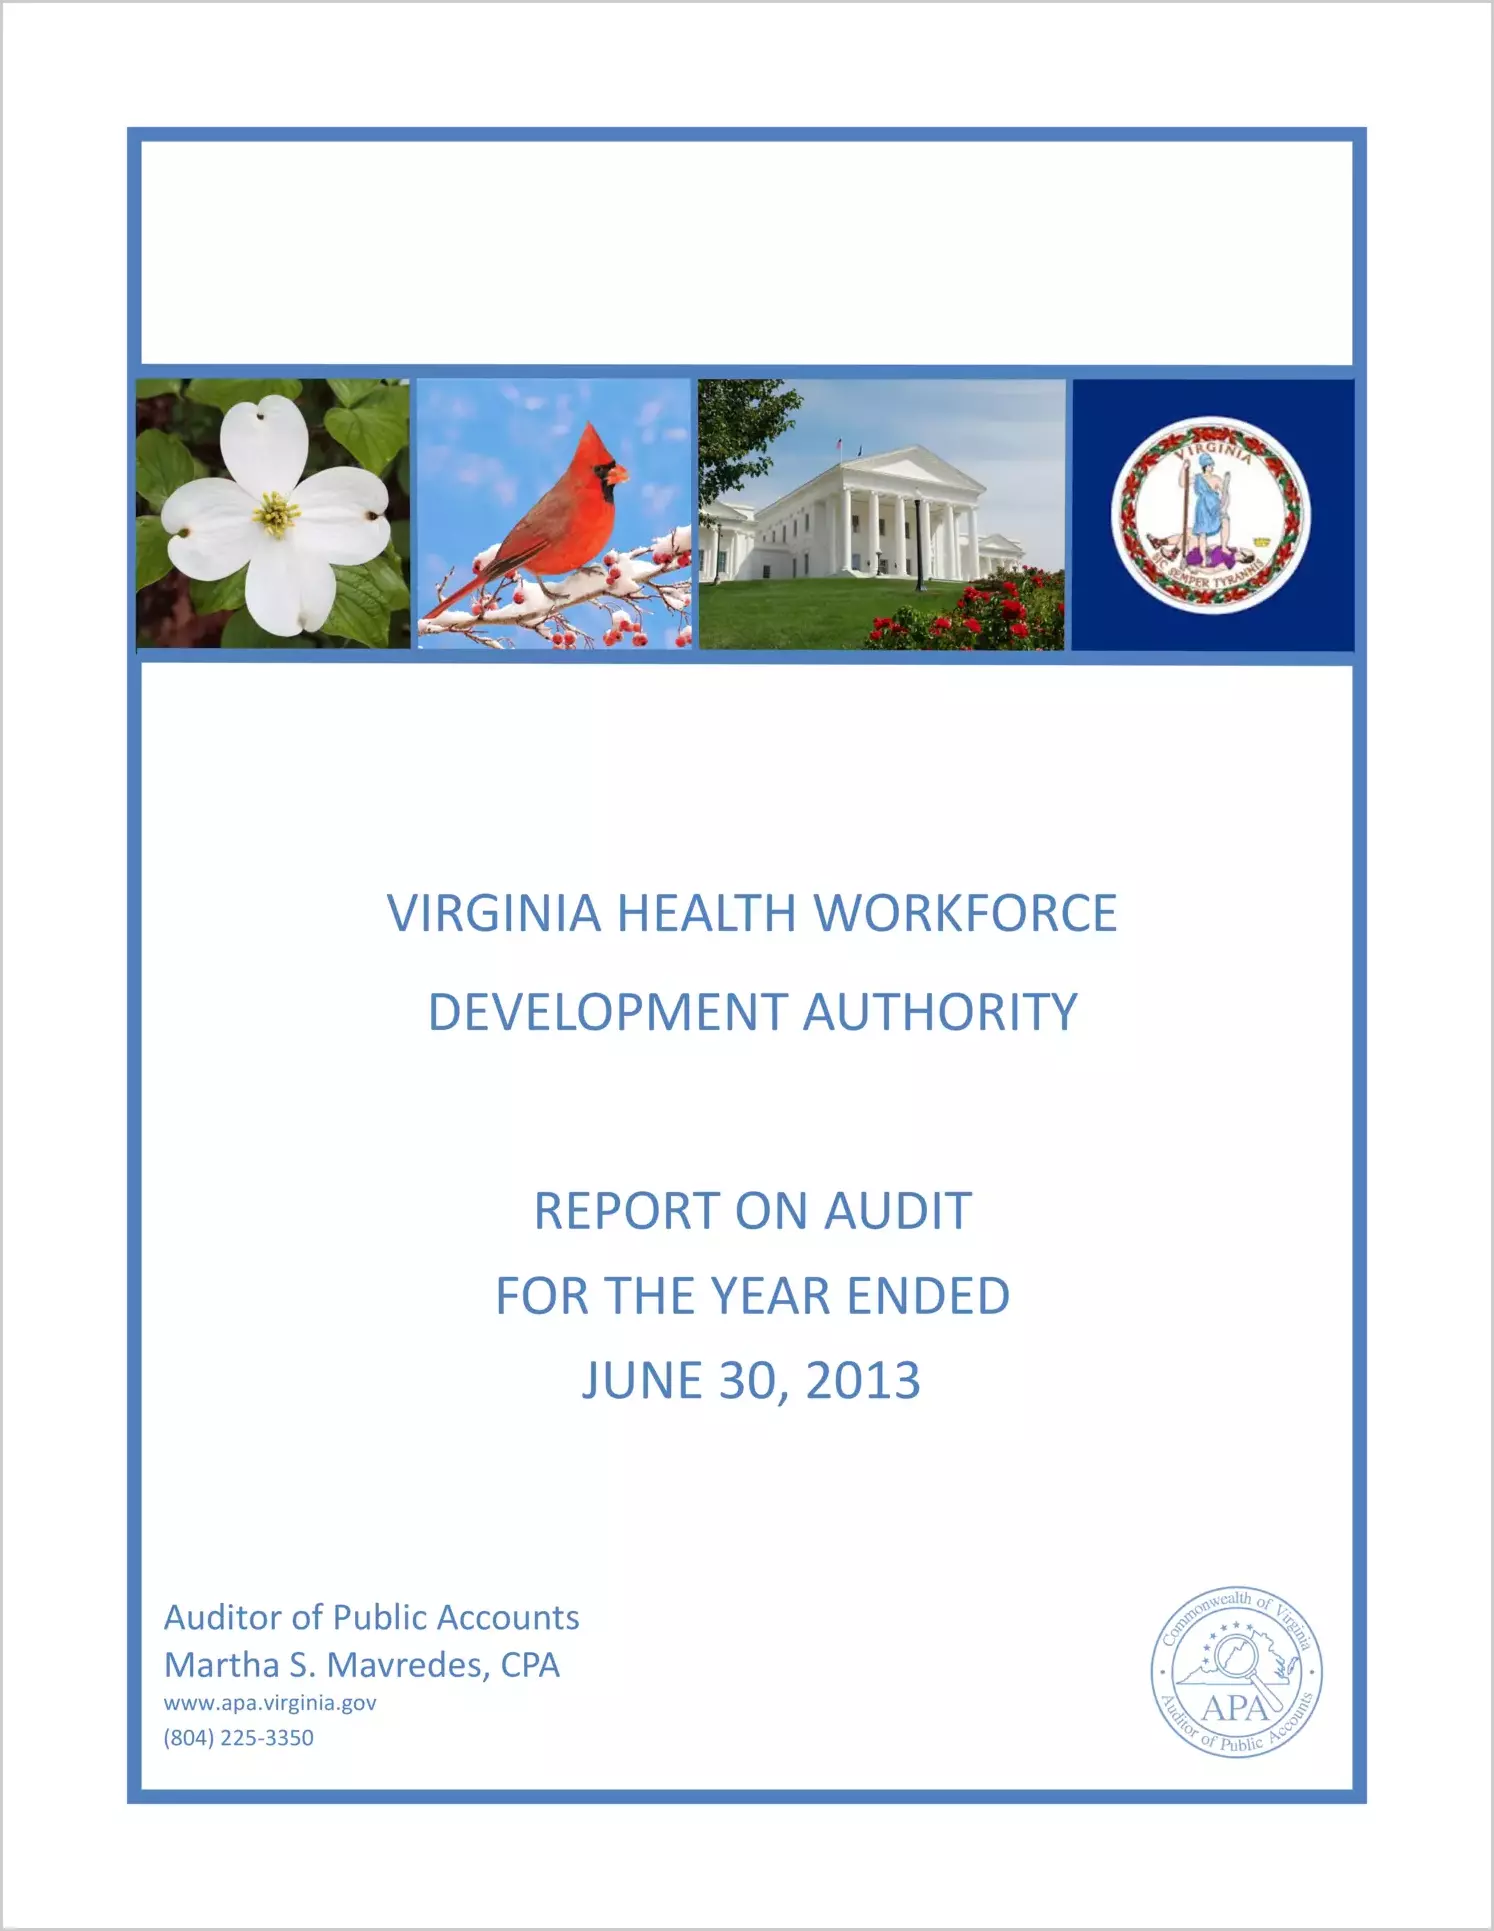 Virginia Health Workforce Development Authority report on audit for the year ended June 30, 2013